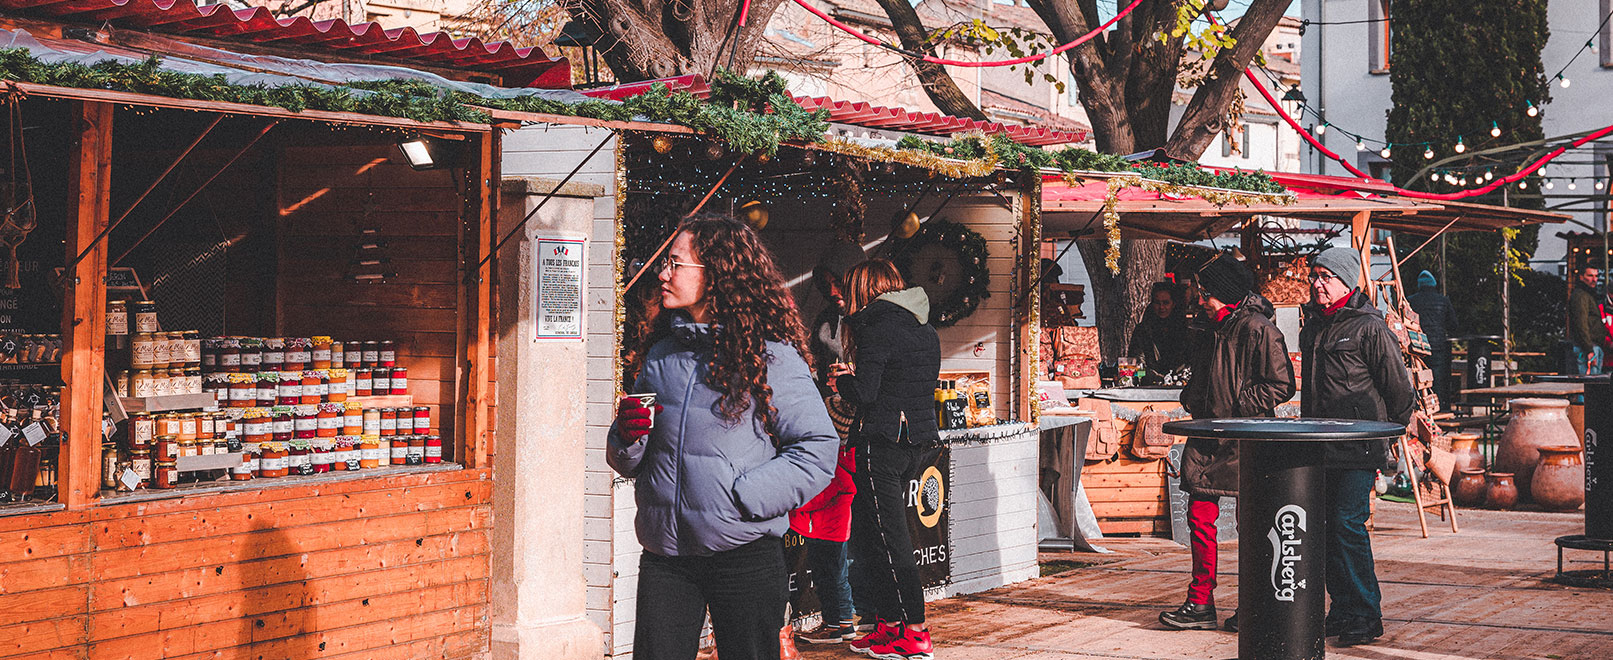 Christmas markets in Provence © LezBroz